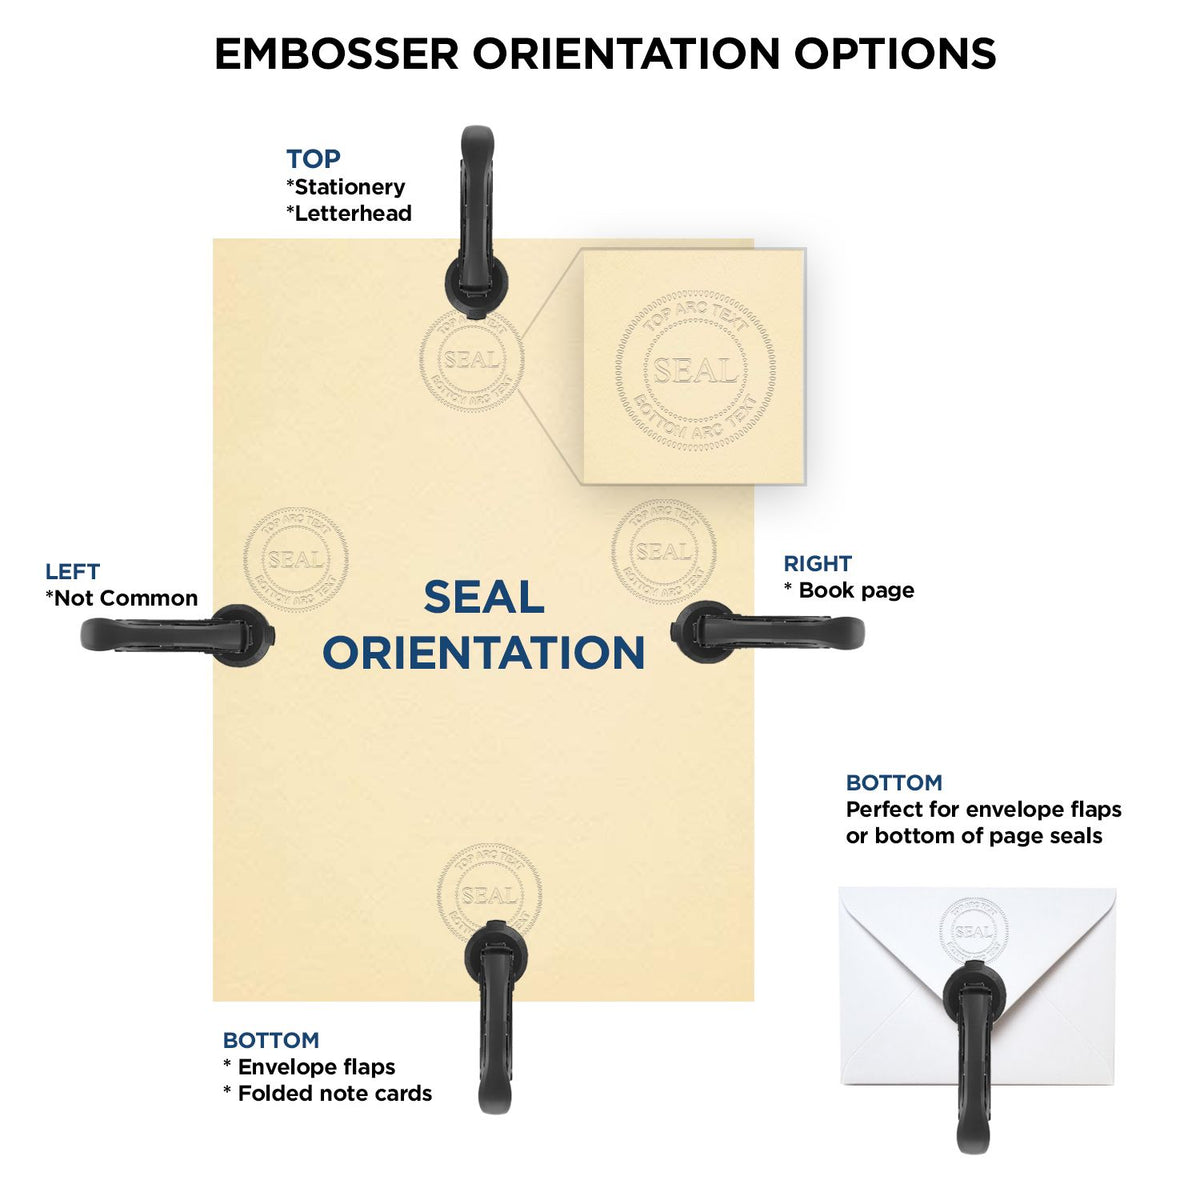 An infographic for the Extended Long Reach Maine Surveyor Embosser showing embosser orientation, this is showing examples of a top, bottom, right and left insert.